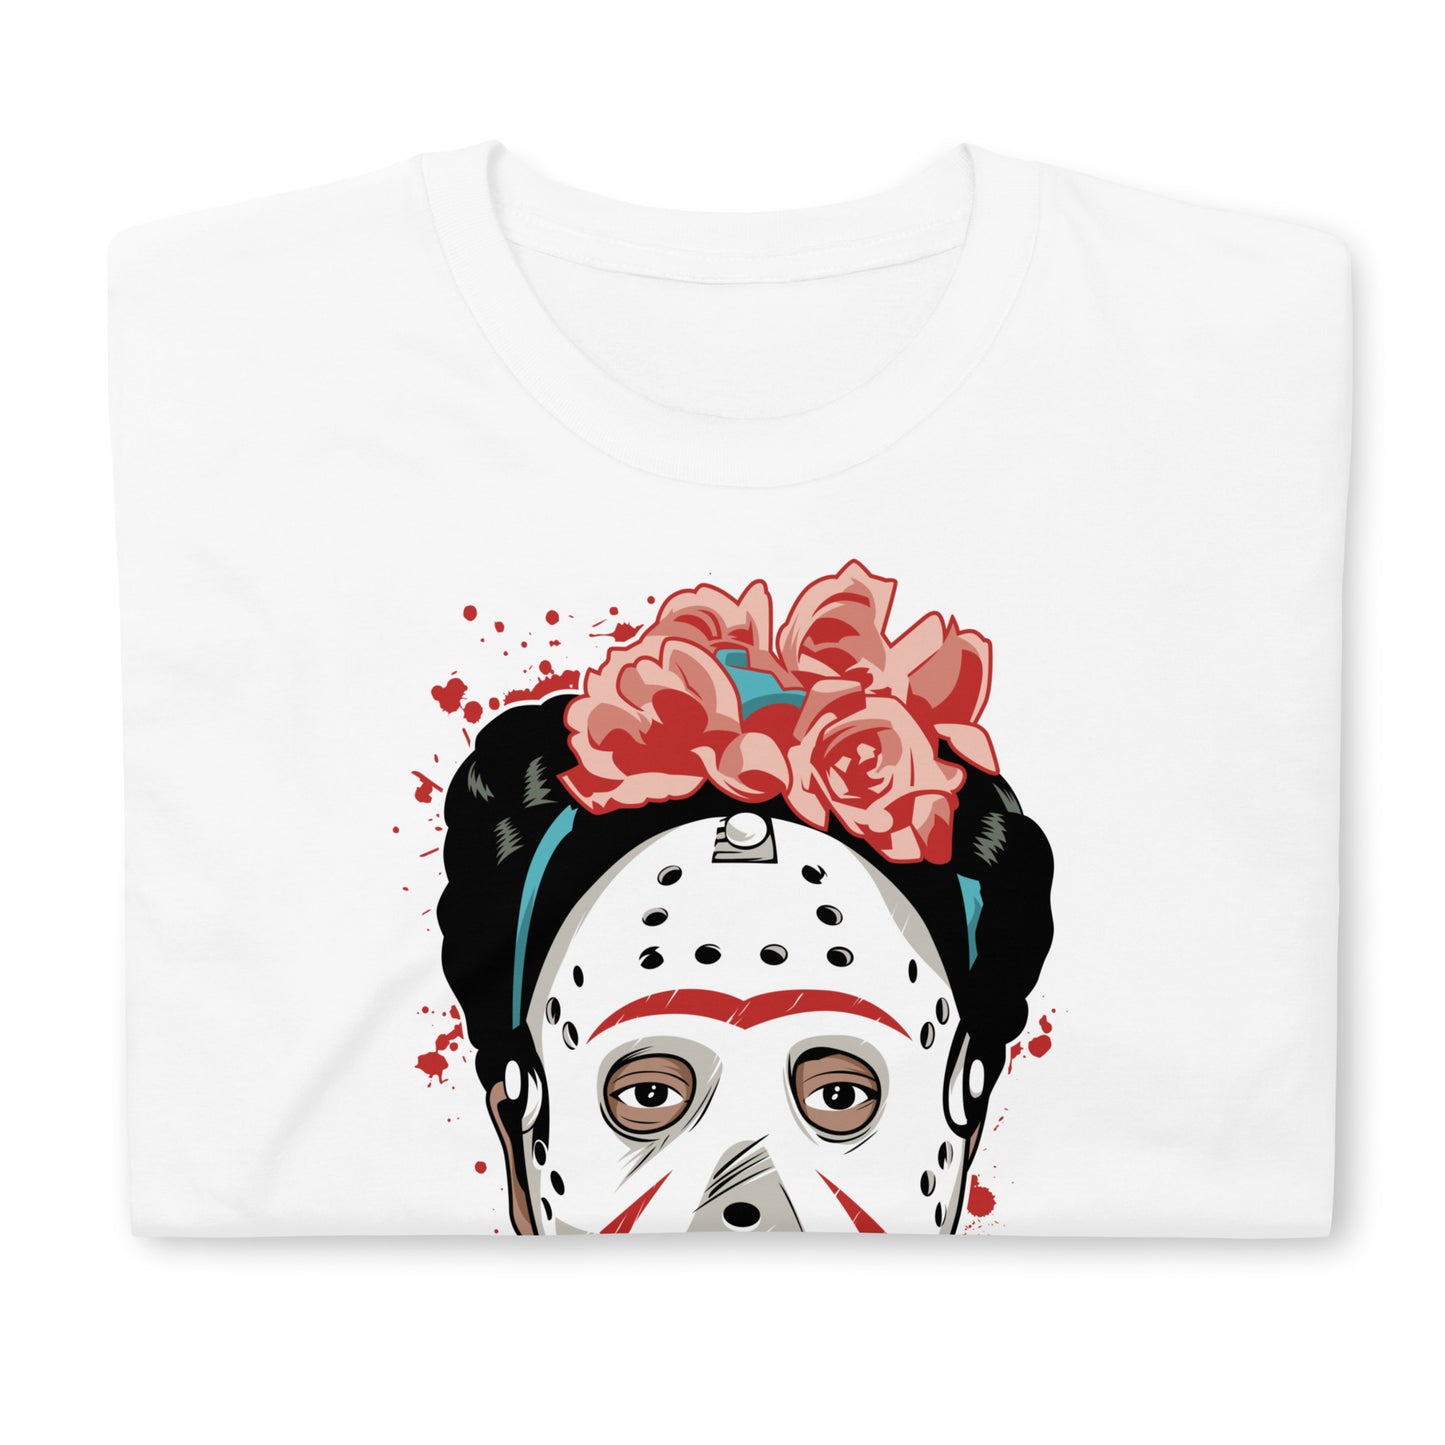 Friday the 13th, Pop Culture Unisex T-Shirt